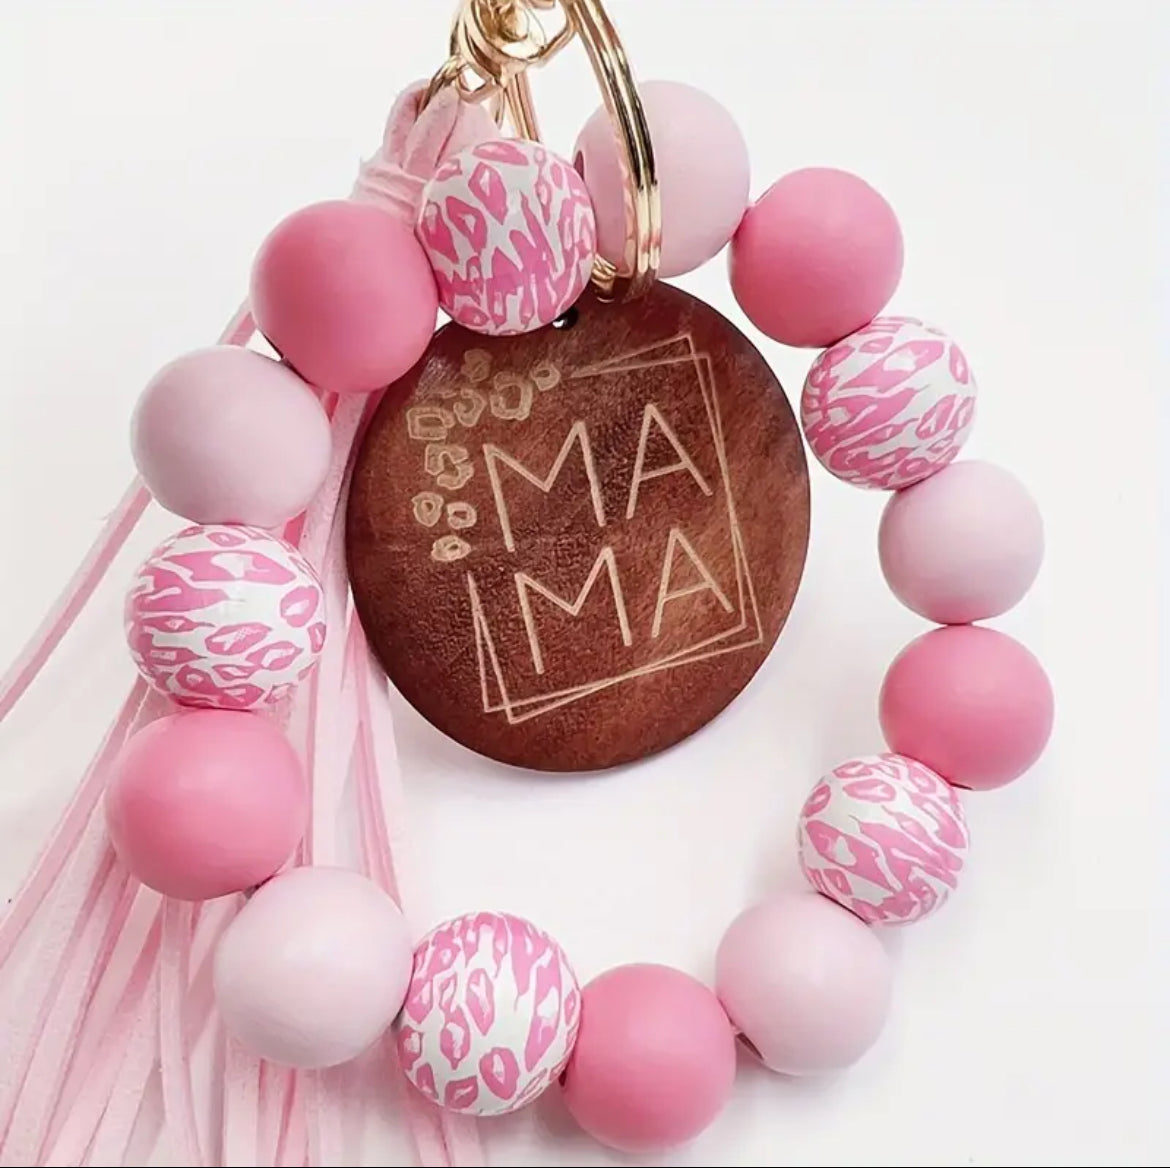 Wooden Beaded MAMA Bracelet Travel Keychain, perfect gift for mom!